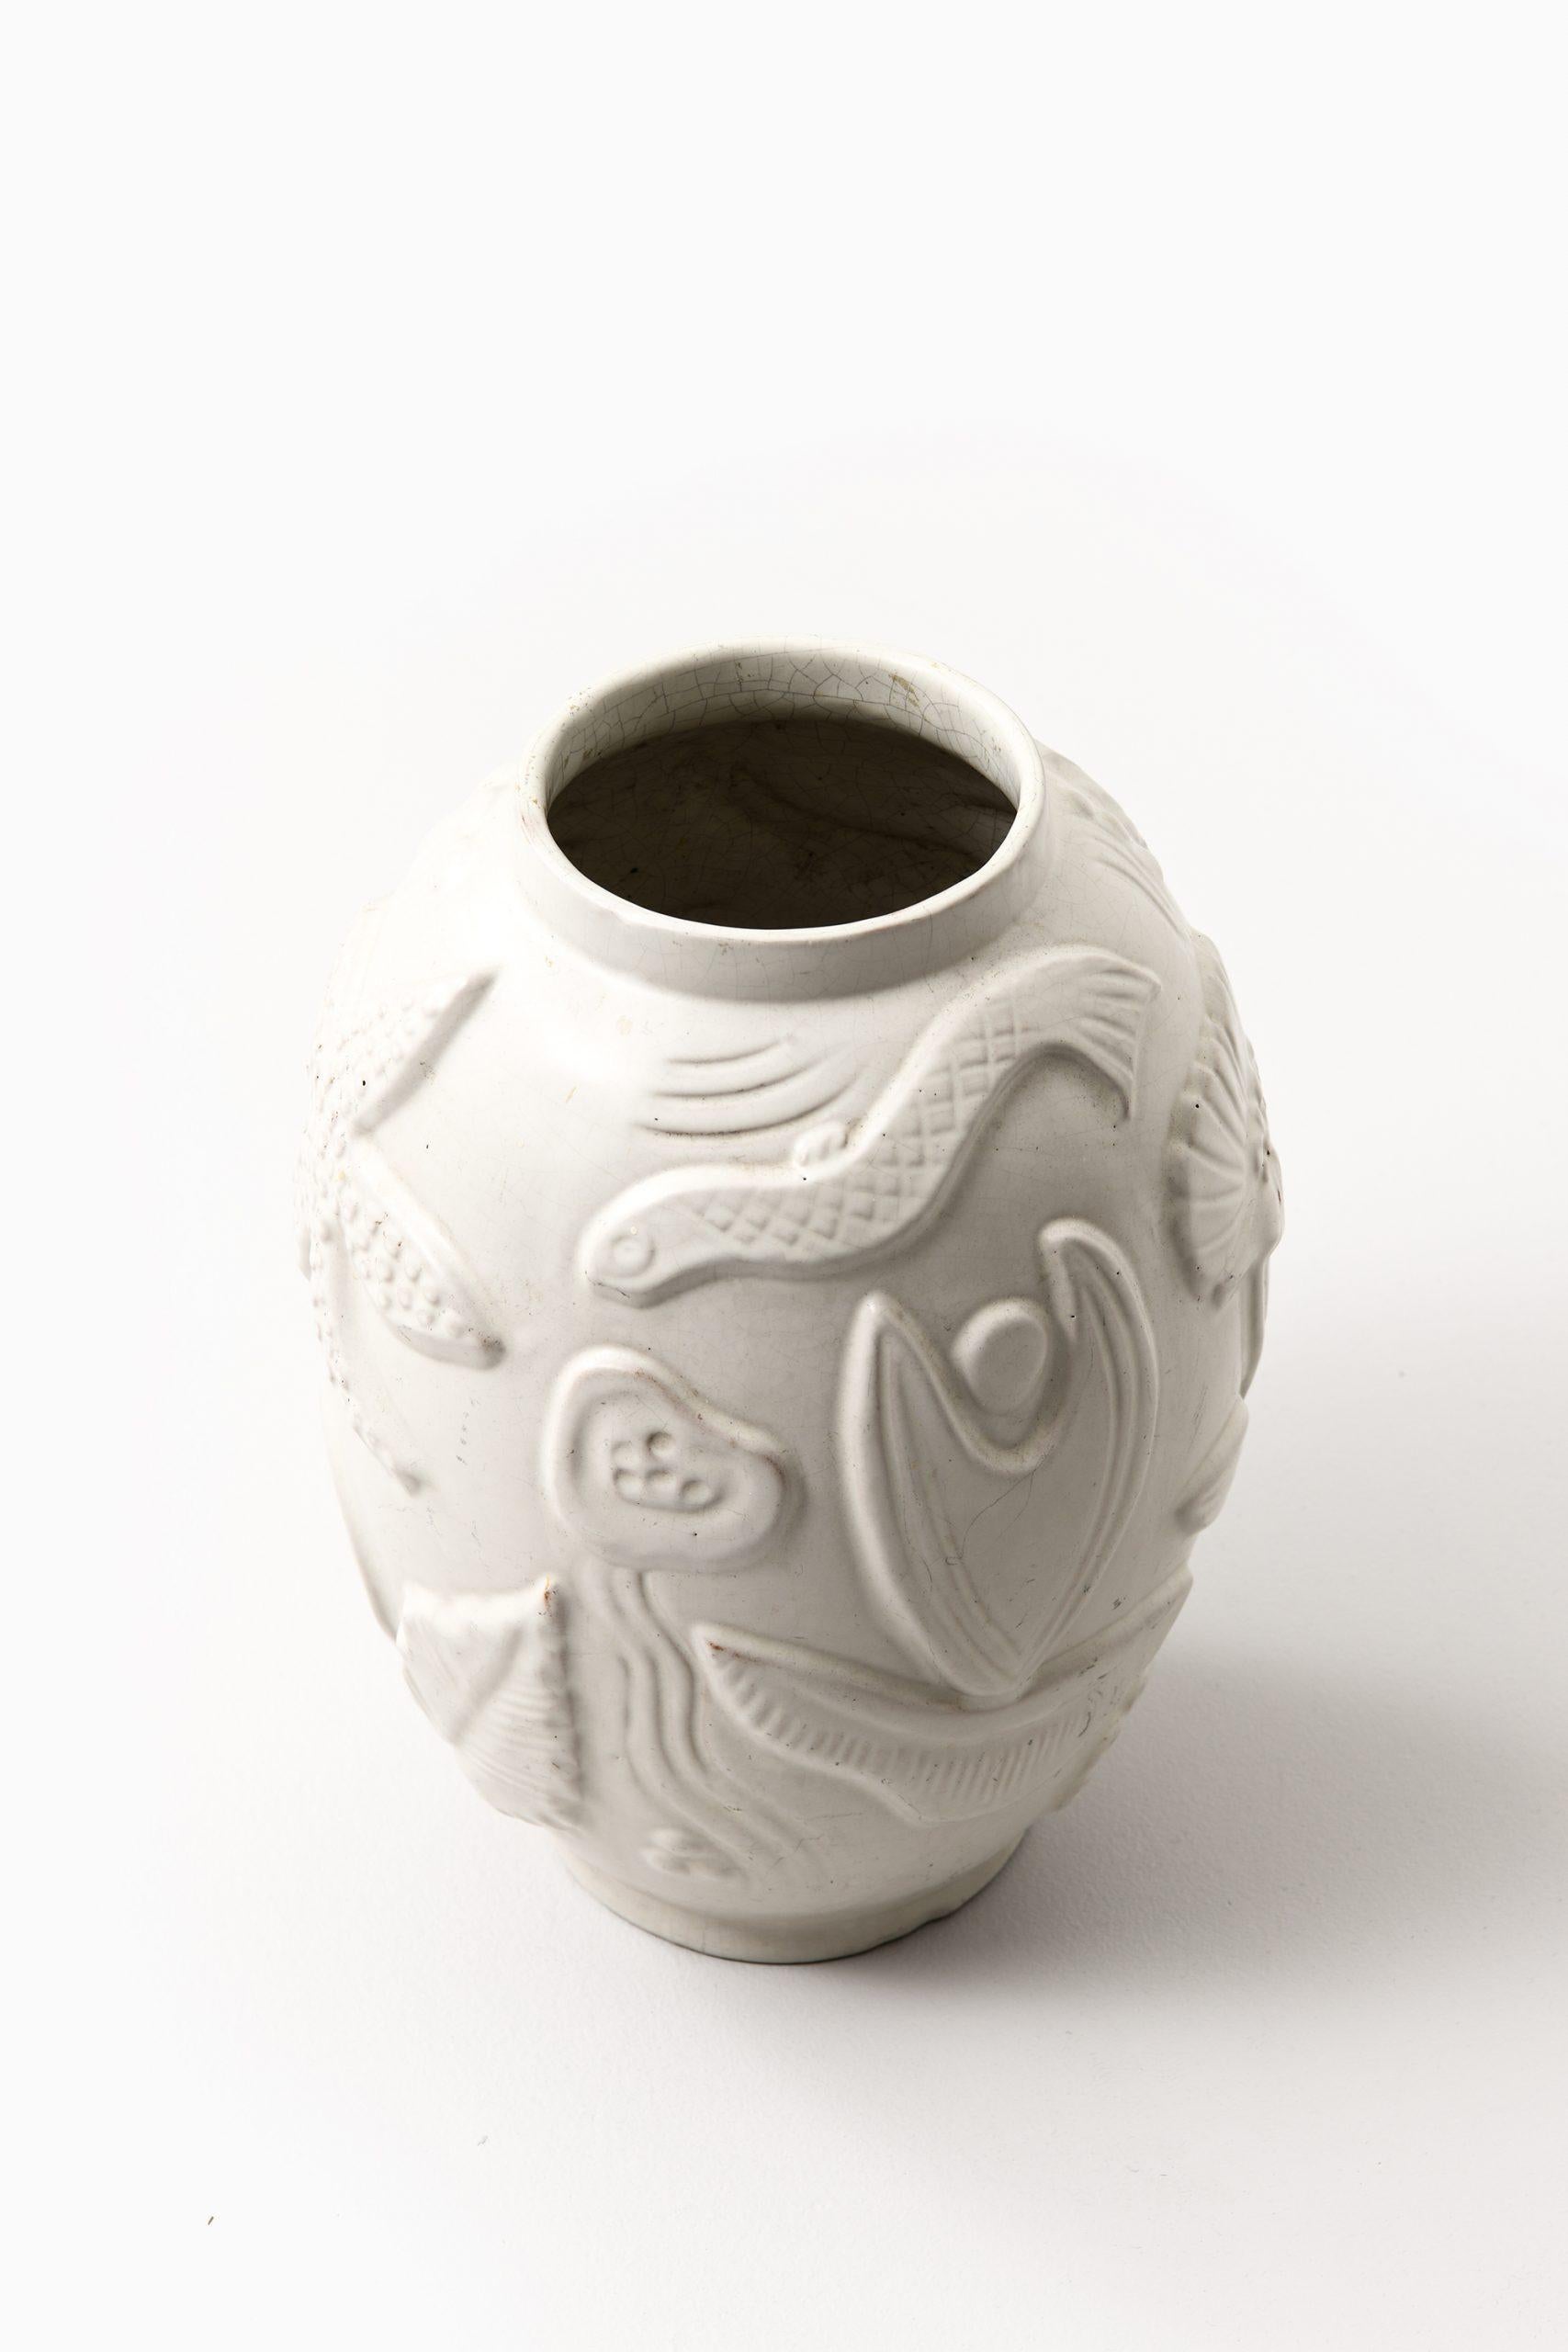 Rare floor vase designed by Anna-Lisa Thomson. Produced by Upsala Ekeby in Sweden.